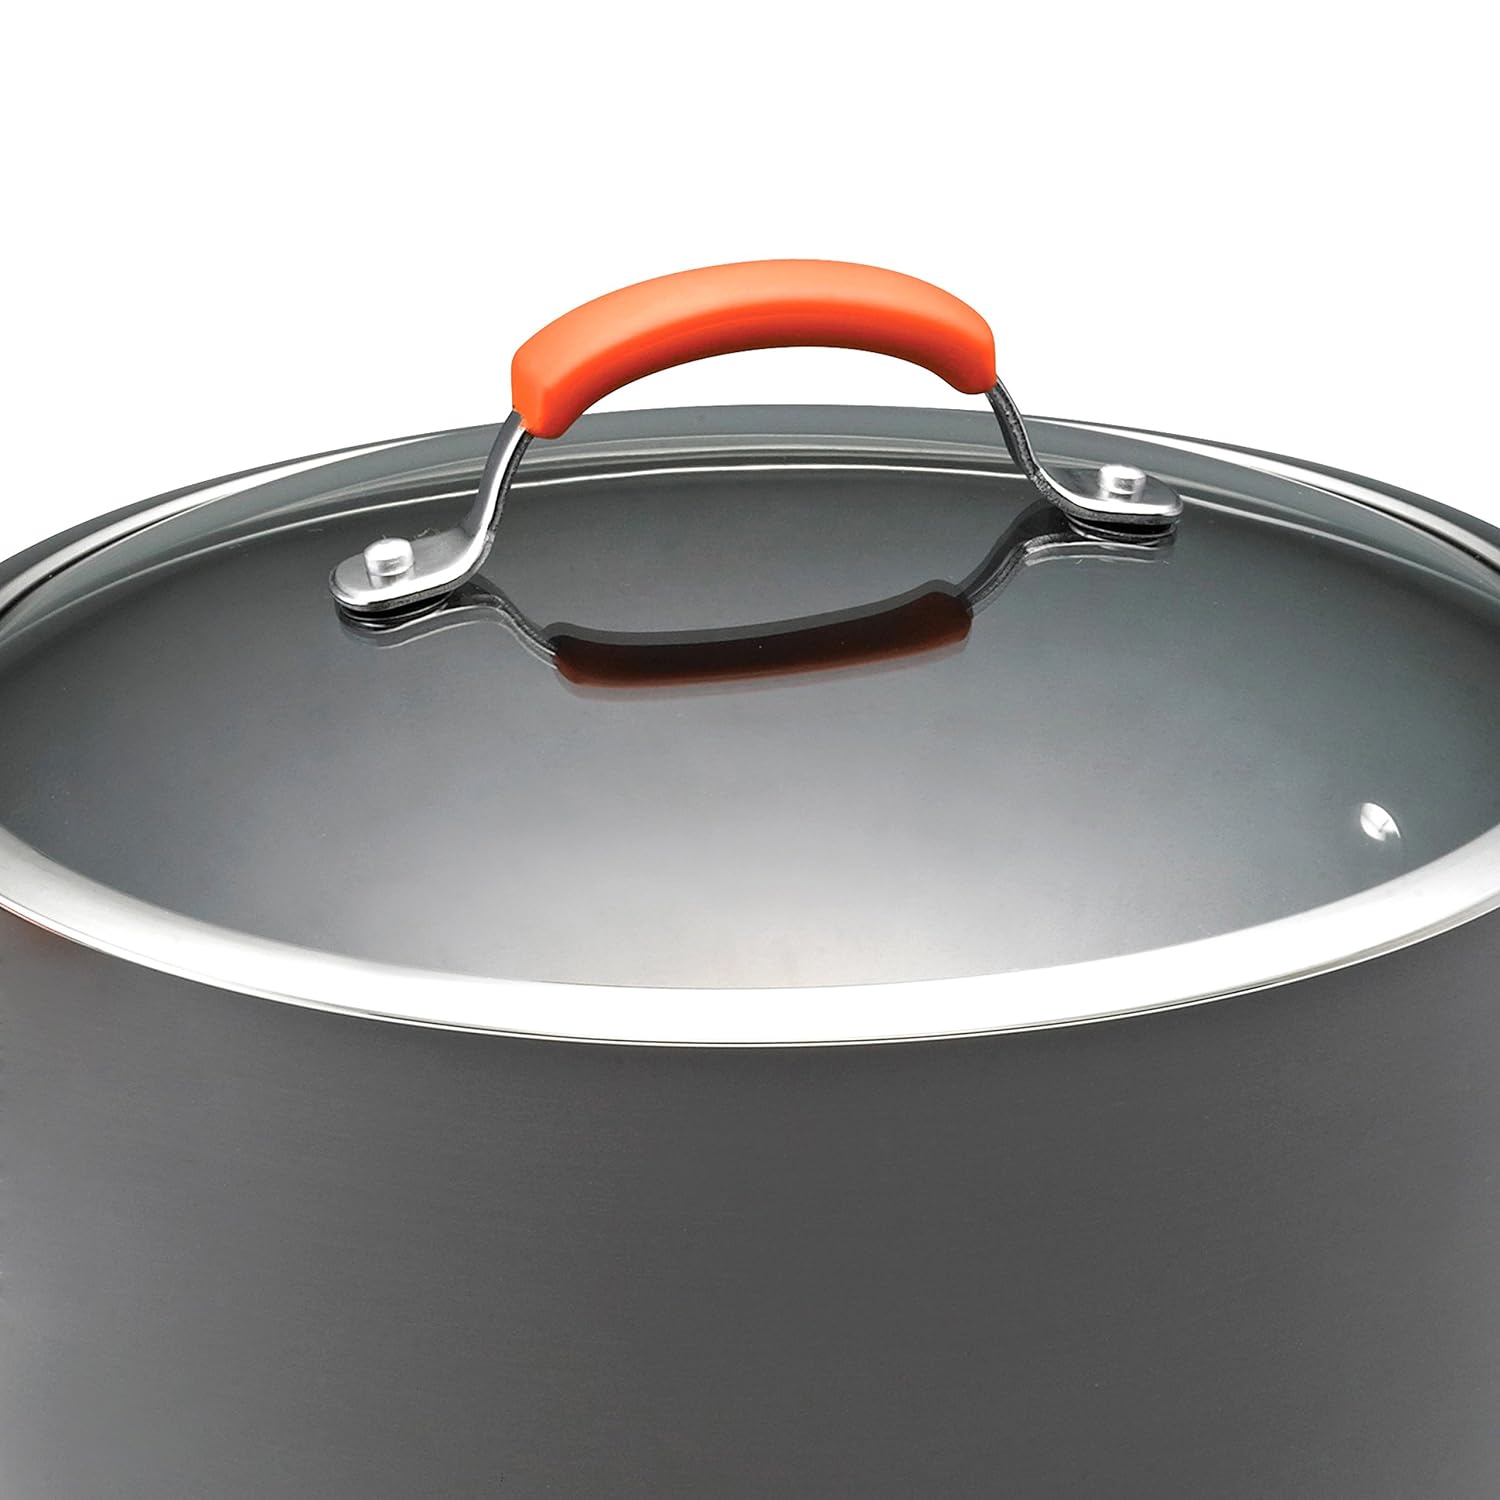 Rachael Ray Brights Hard Anodized Nonstick Stock Pot/Stockpot with Lid, 10 Quart, Gray with Orange Handles